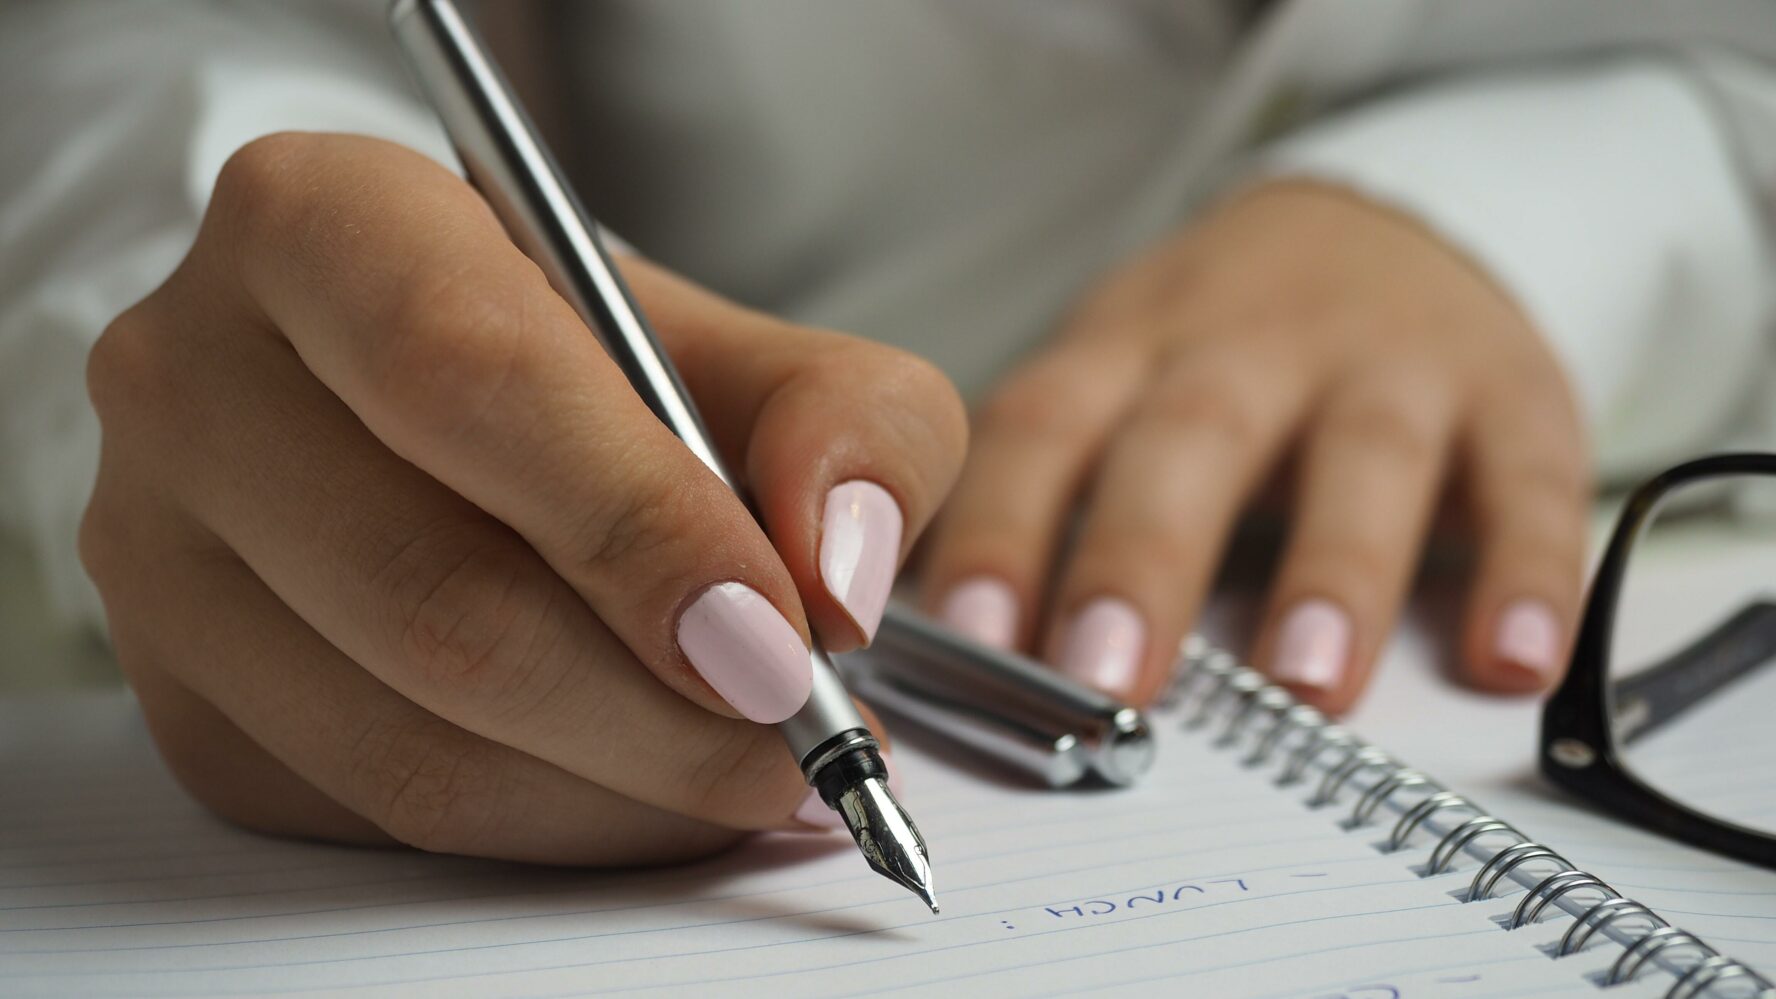 A hand with pink nail varnish holding a pen and writing in a notebook.